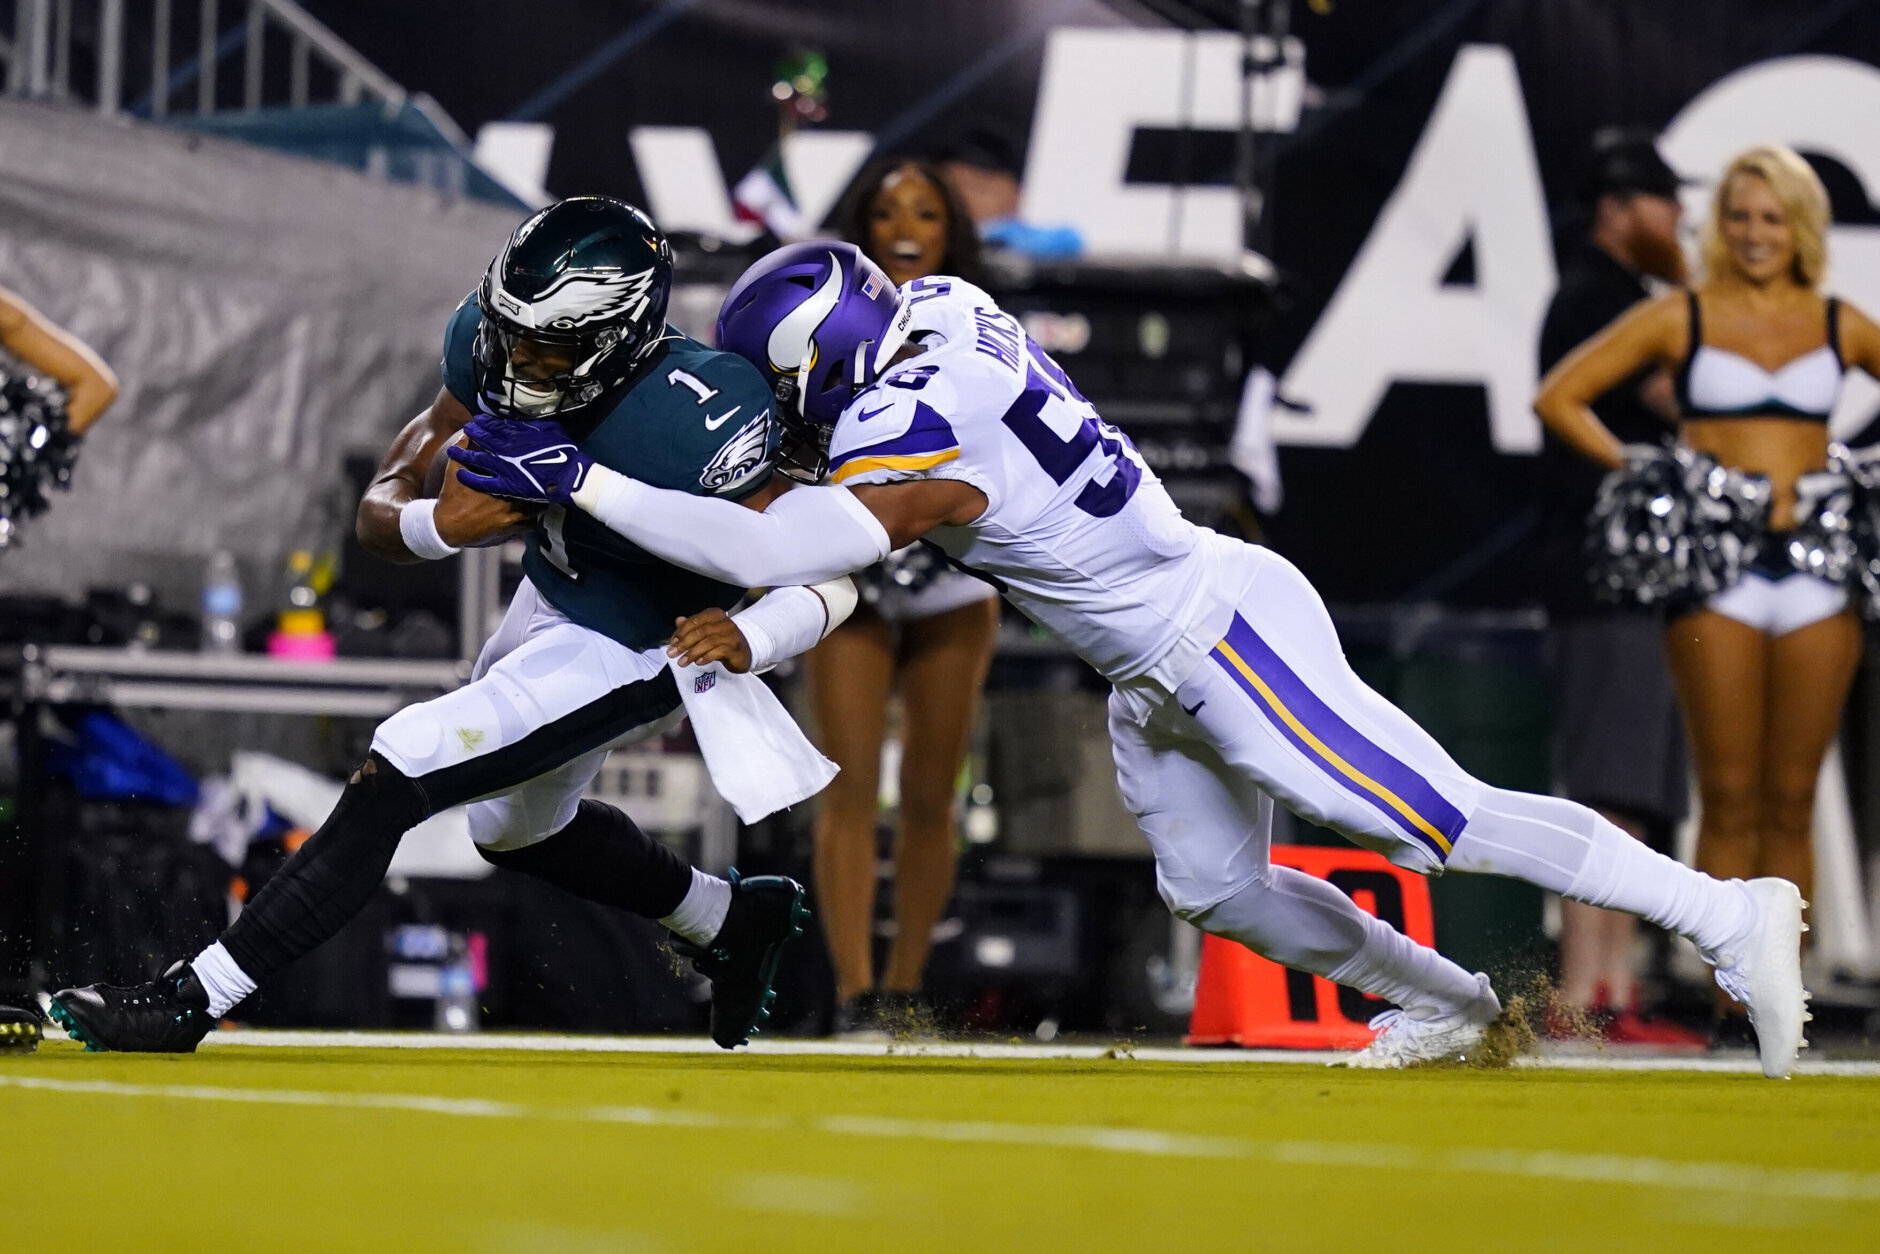 <p><b><i>Vikings 7</i></b><br />
<b><i>Eagles 24</i></b></p>
<p>If Jalen Hurts can shred a Minnesota defense that shut down Aaron Rodgers, what do you think he&#8217;s gonna do to the struggling Commanders defense? Philly might force FedEx Field to add a third digit to the visitor&#8217;s side of the scoreboard.</p>
<p>Former Washington quarterback <a href="https://twitter.com/ESPNStatsInfo/status/1572059398230474752?s=20&amp;t=G2mp1DAS3a9lVt2yatxDAQ">Kirk Cousins found the Eagles defense more times than his favorite receiver</a> and is now 2-10 on Monday Night Football, the worst MNF record in NFL history. With Rodgers aging and no other true threats in the NFC North, the Vikings have to be careful not to blow a championship window on this terrible investment.</p>
